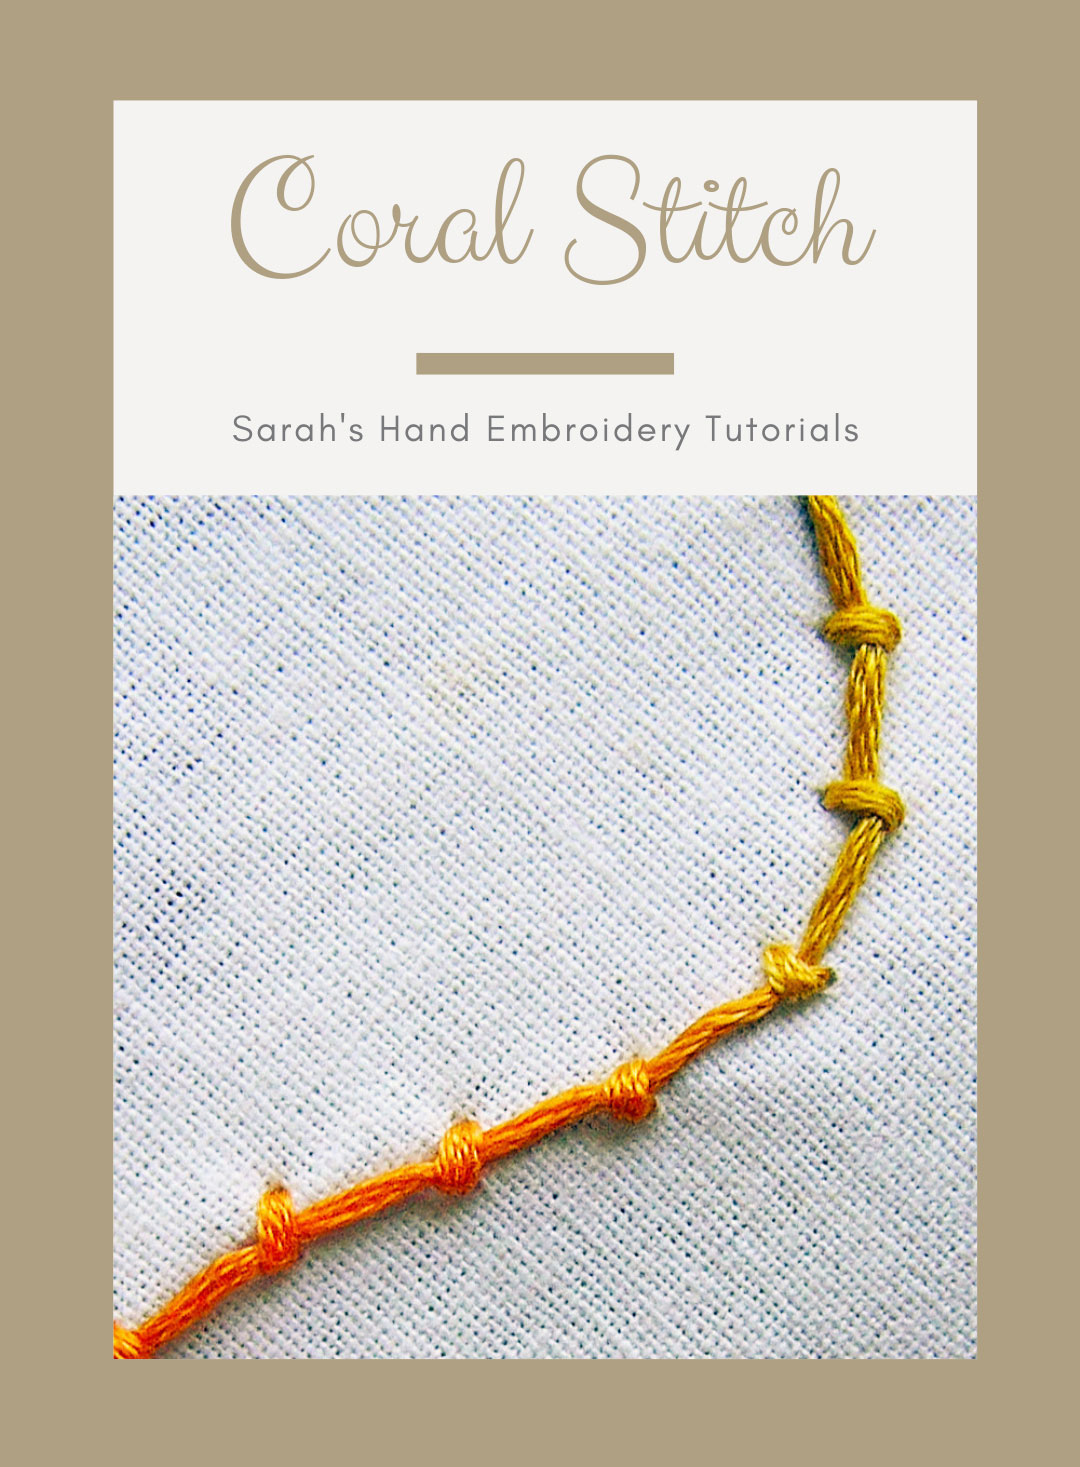 How to do Closed Blanket Stitch - Sarah's Hand Embroidery Tutorials